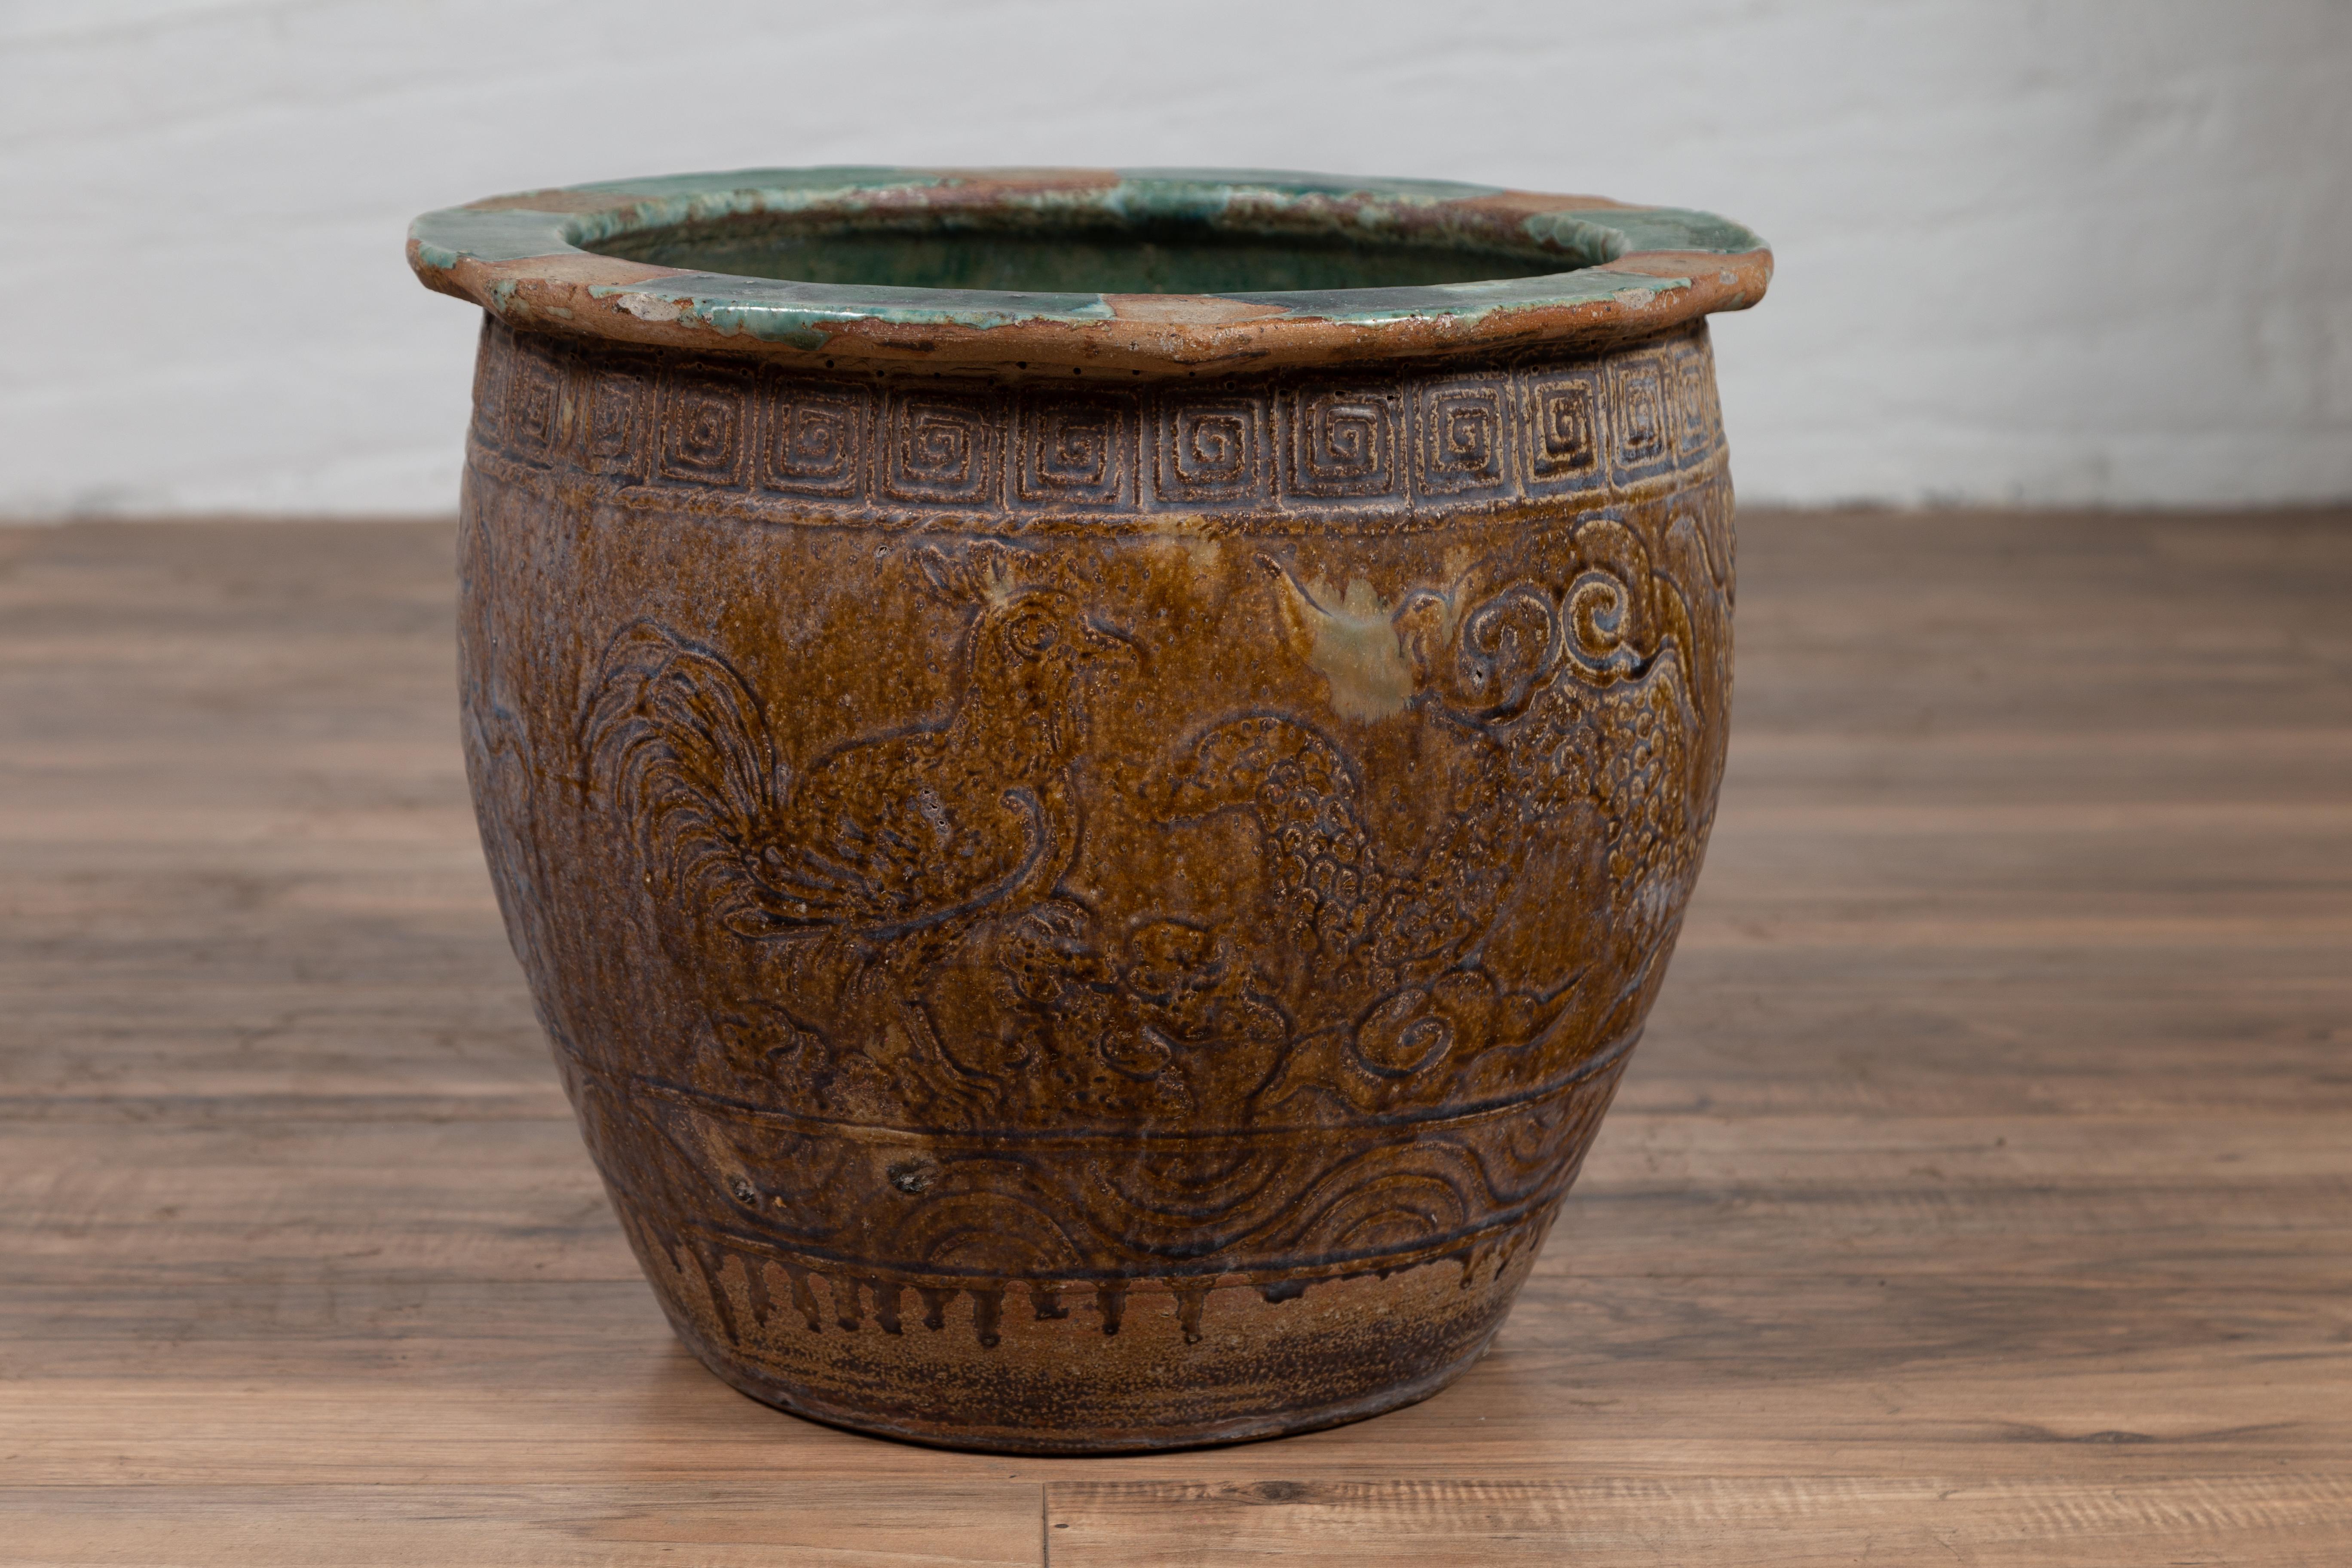 20th Century Chinese Antique Planter with Weathered Patina, Greek Key, Animals and Clouds